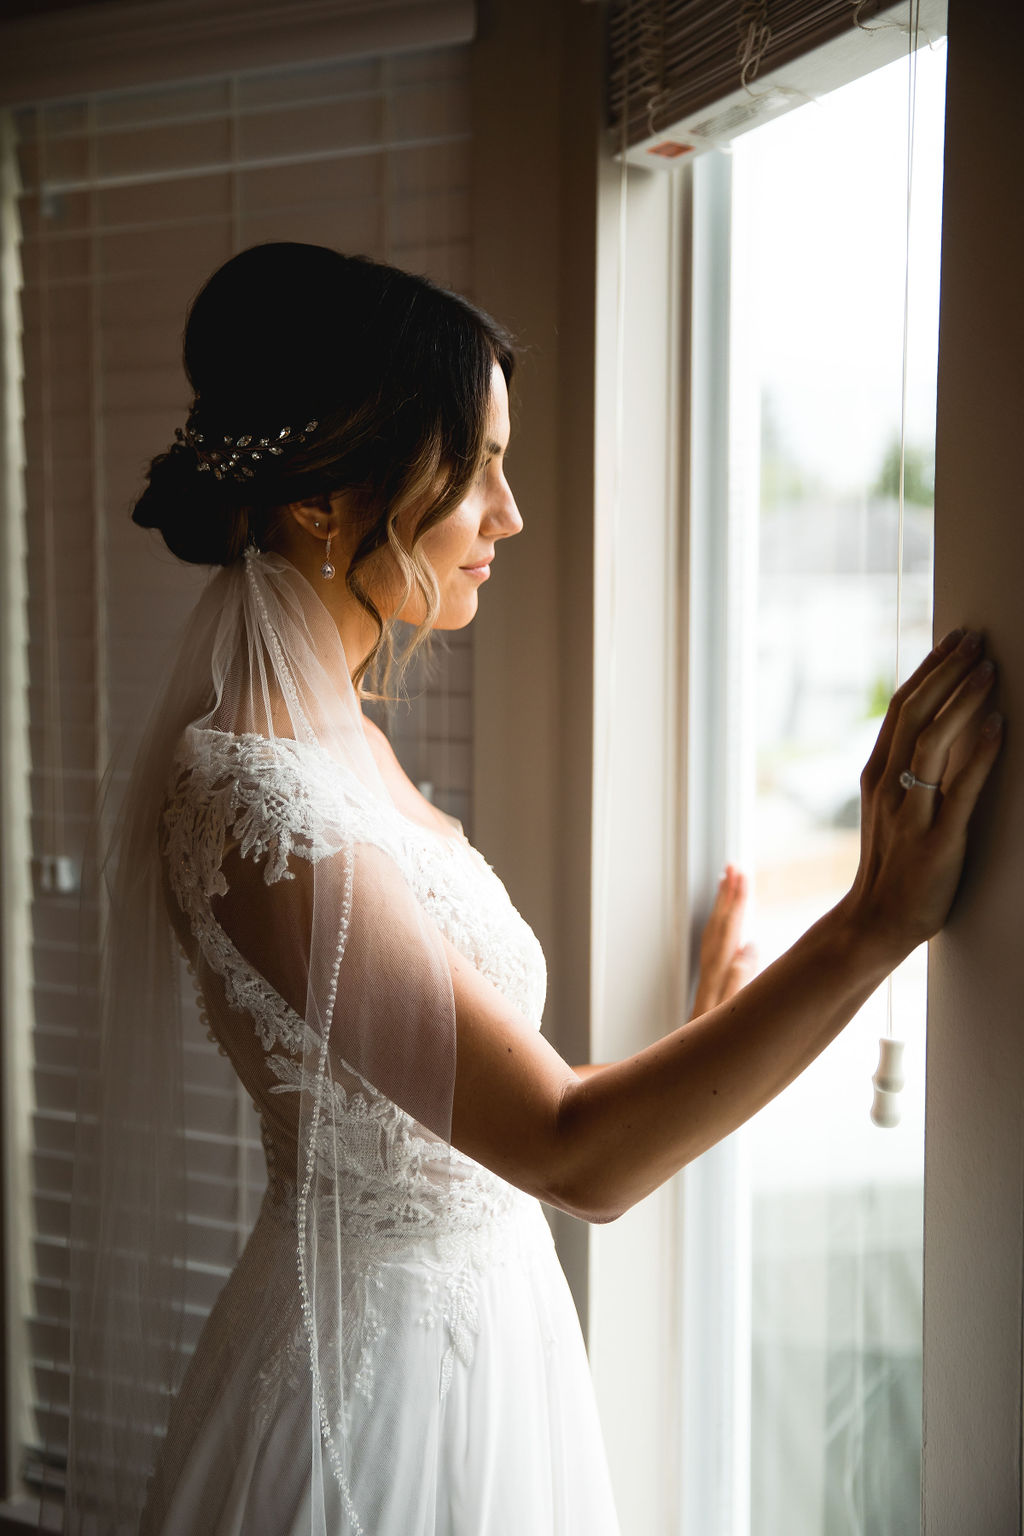 Bride looks out window in lace gown